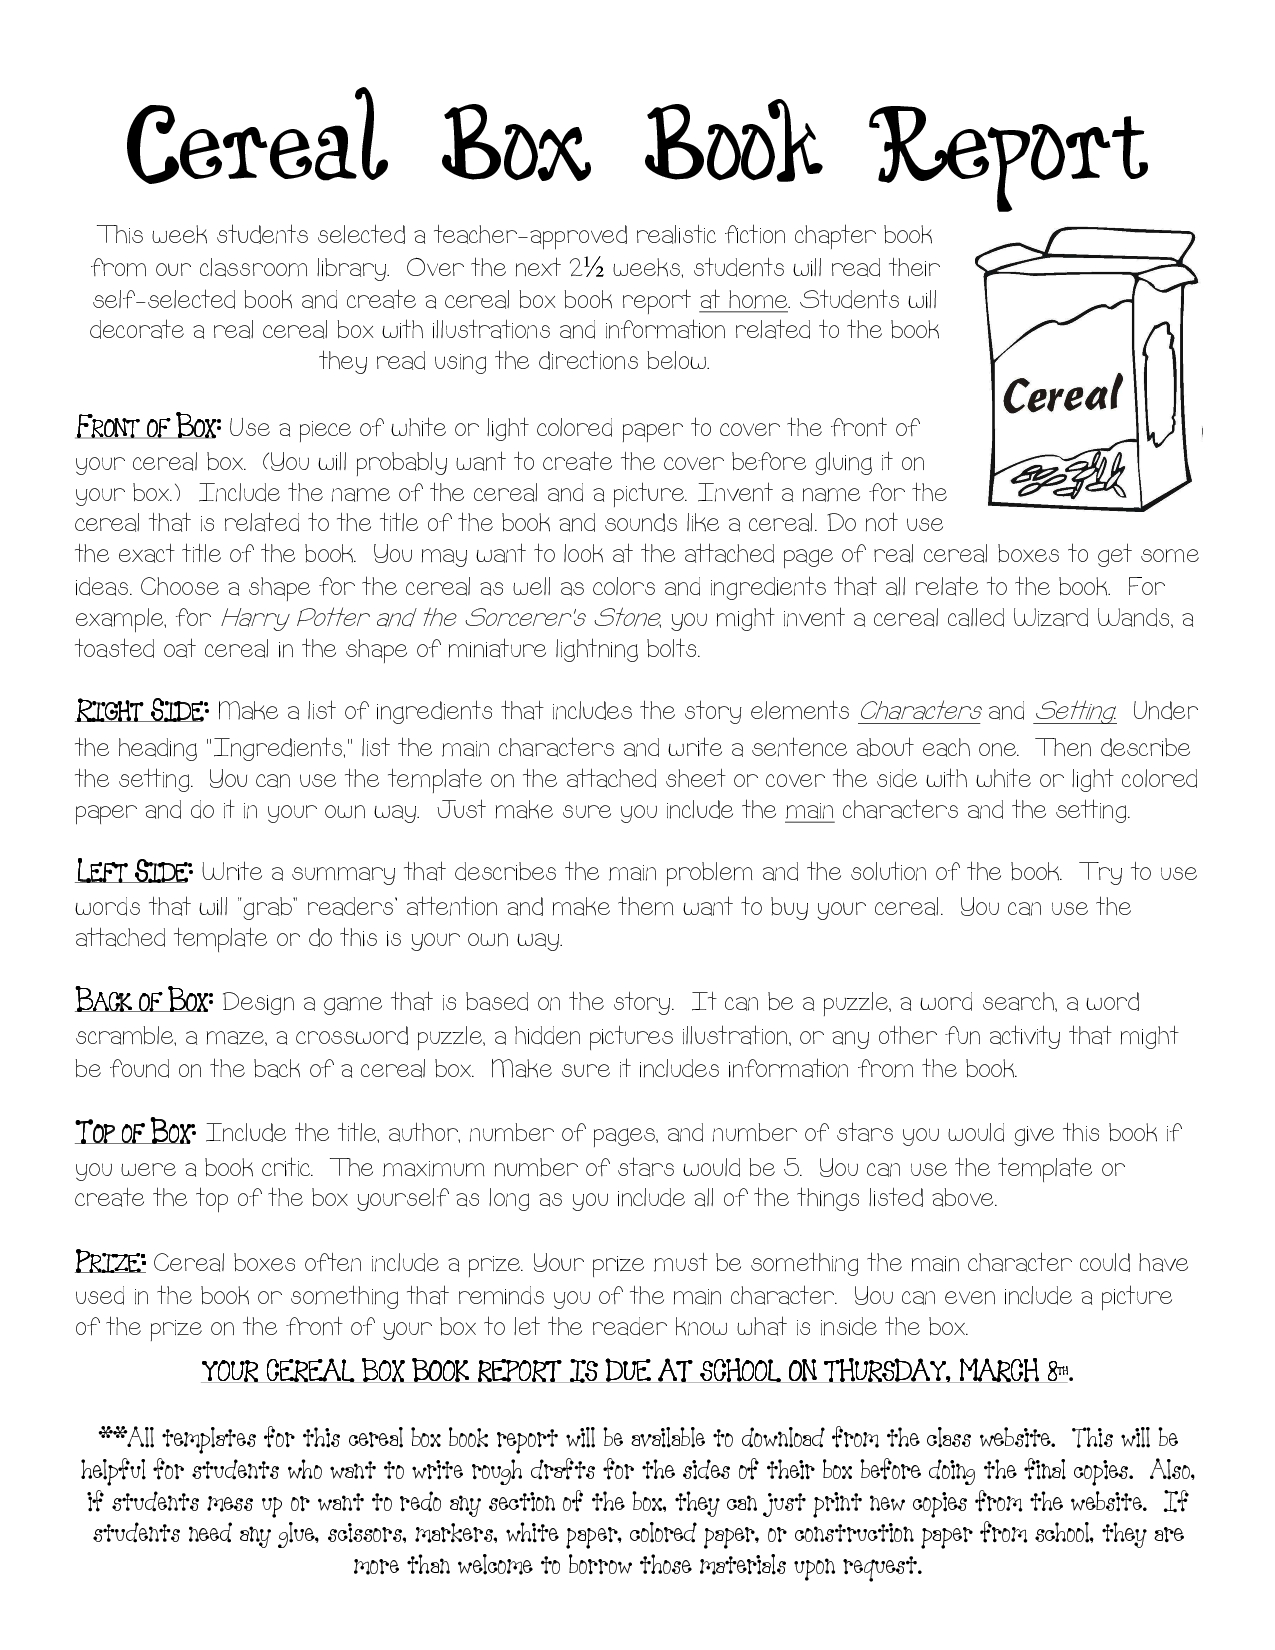 Cereal Box Book Report Instructions | Cereal Box Book Report Regarding Cereal Box Book Report Template